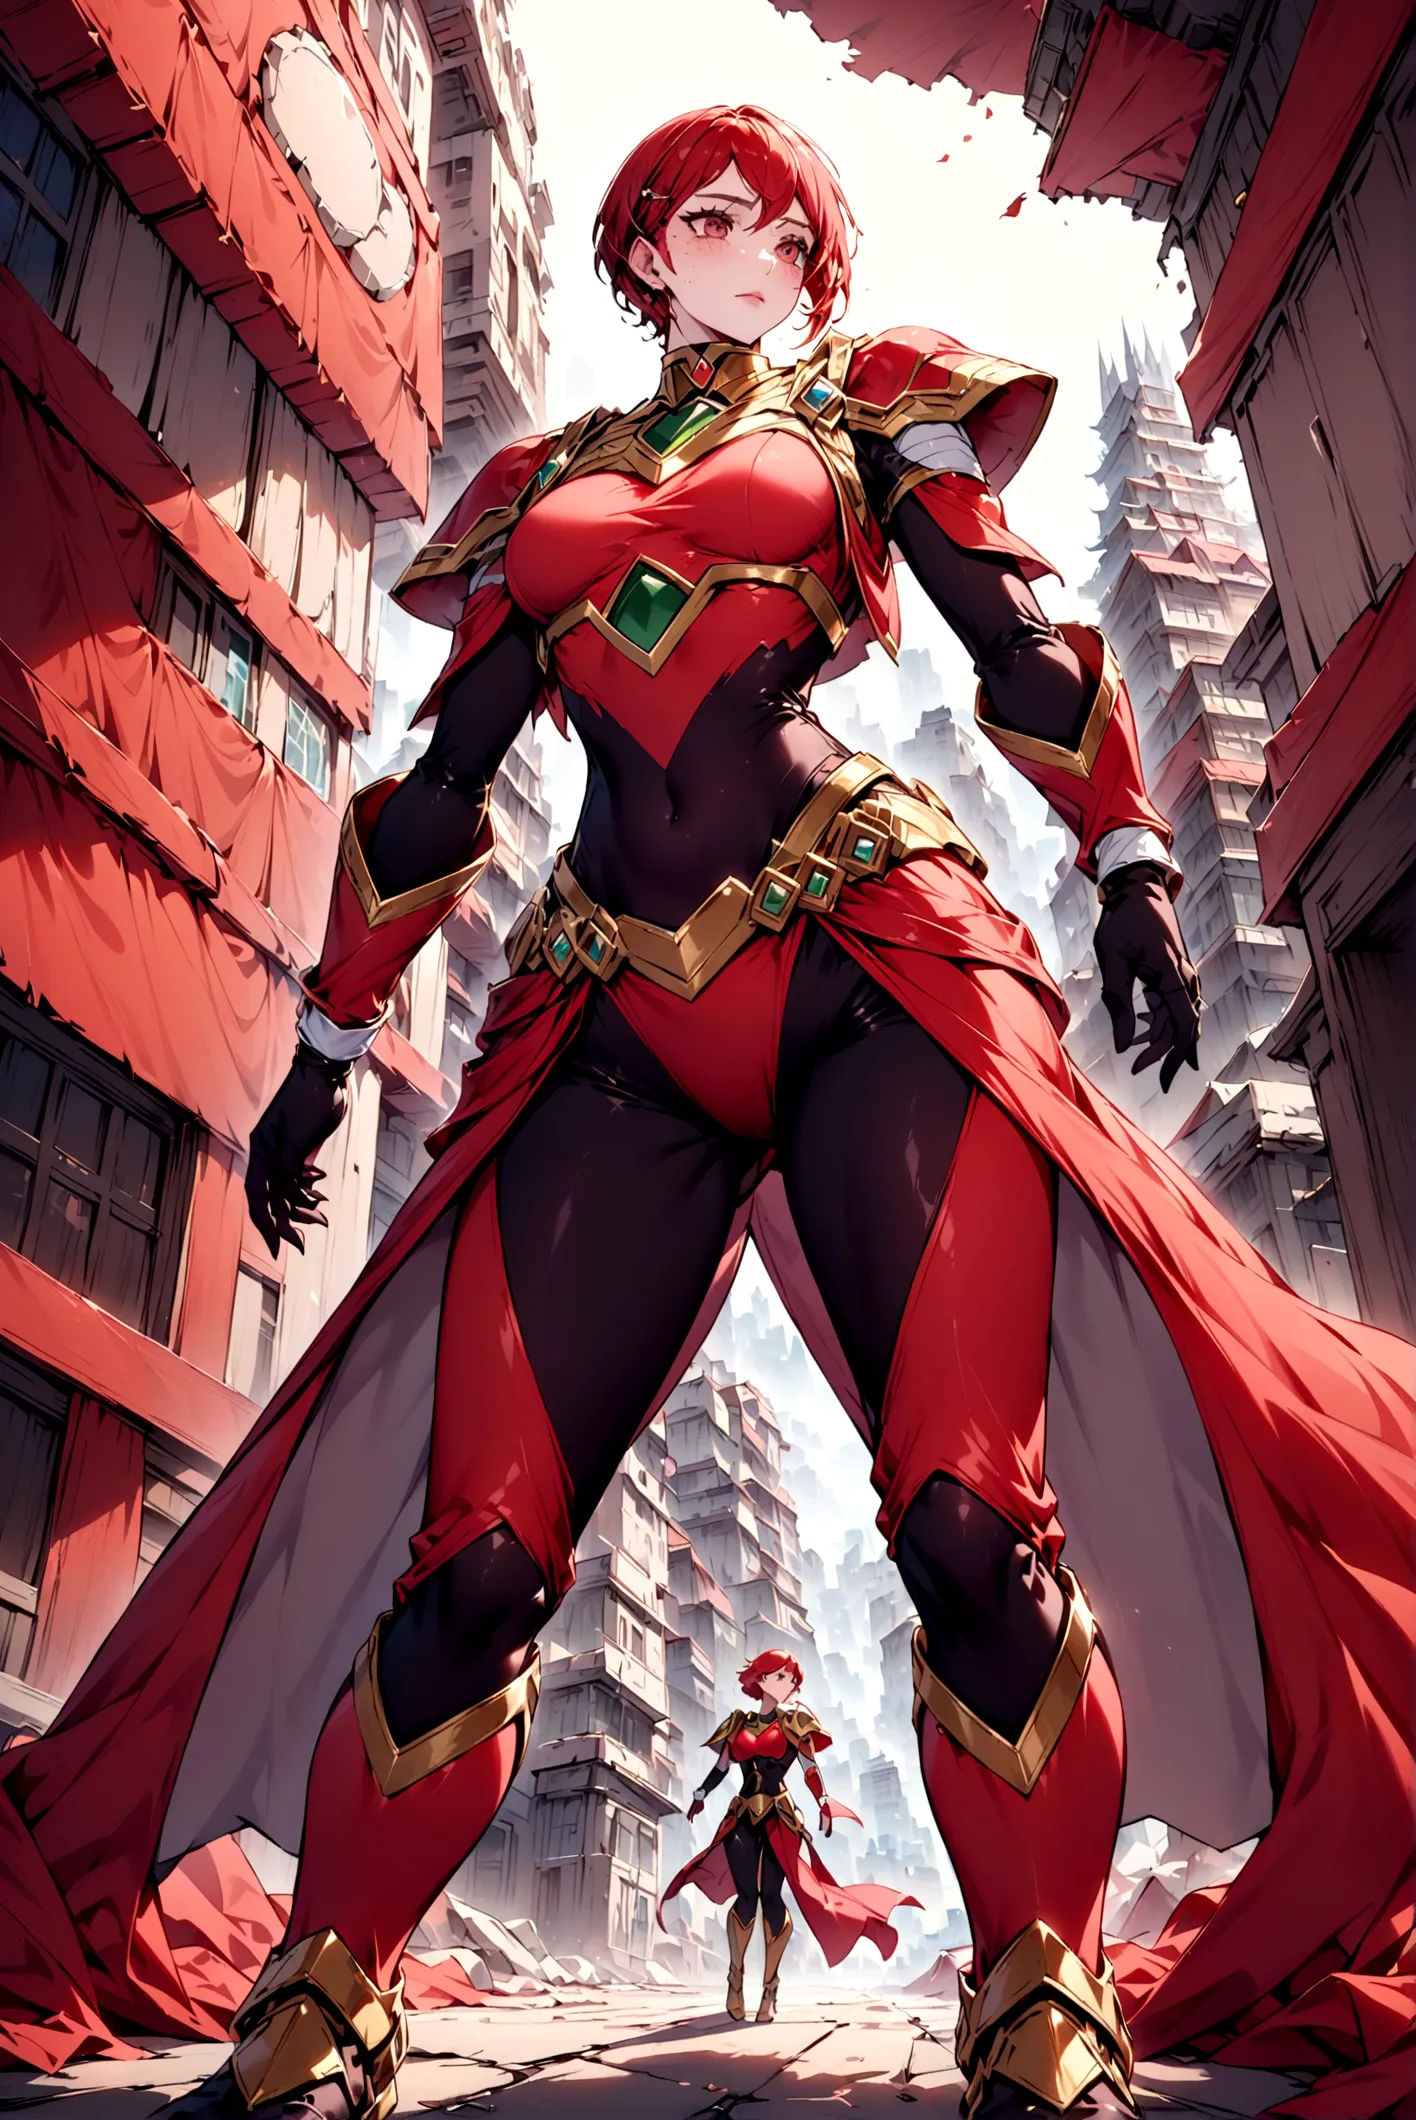 A character could be created with a design similar to the red Power Ranger with a devastated city behind 